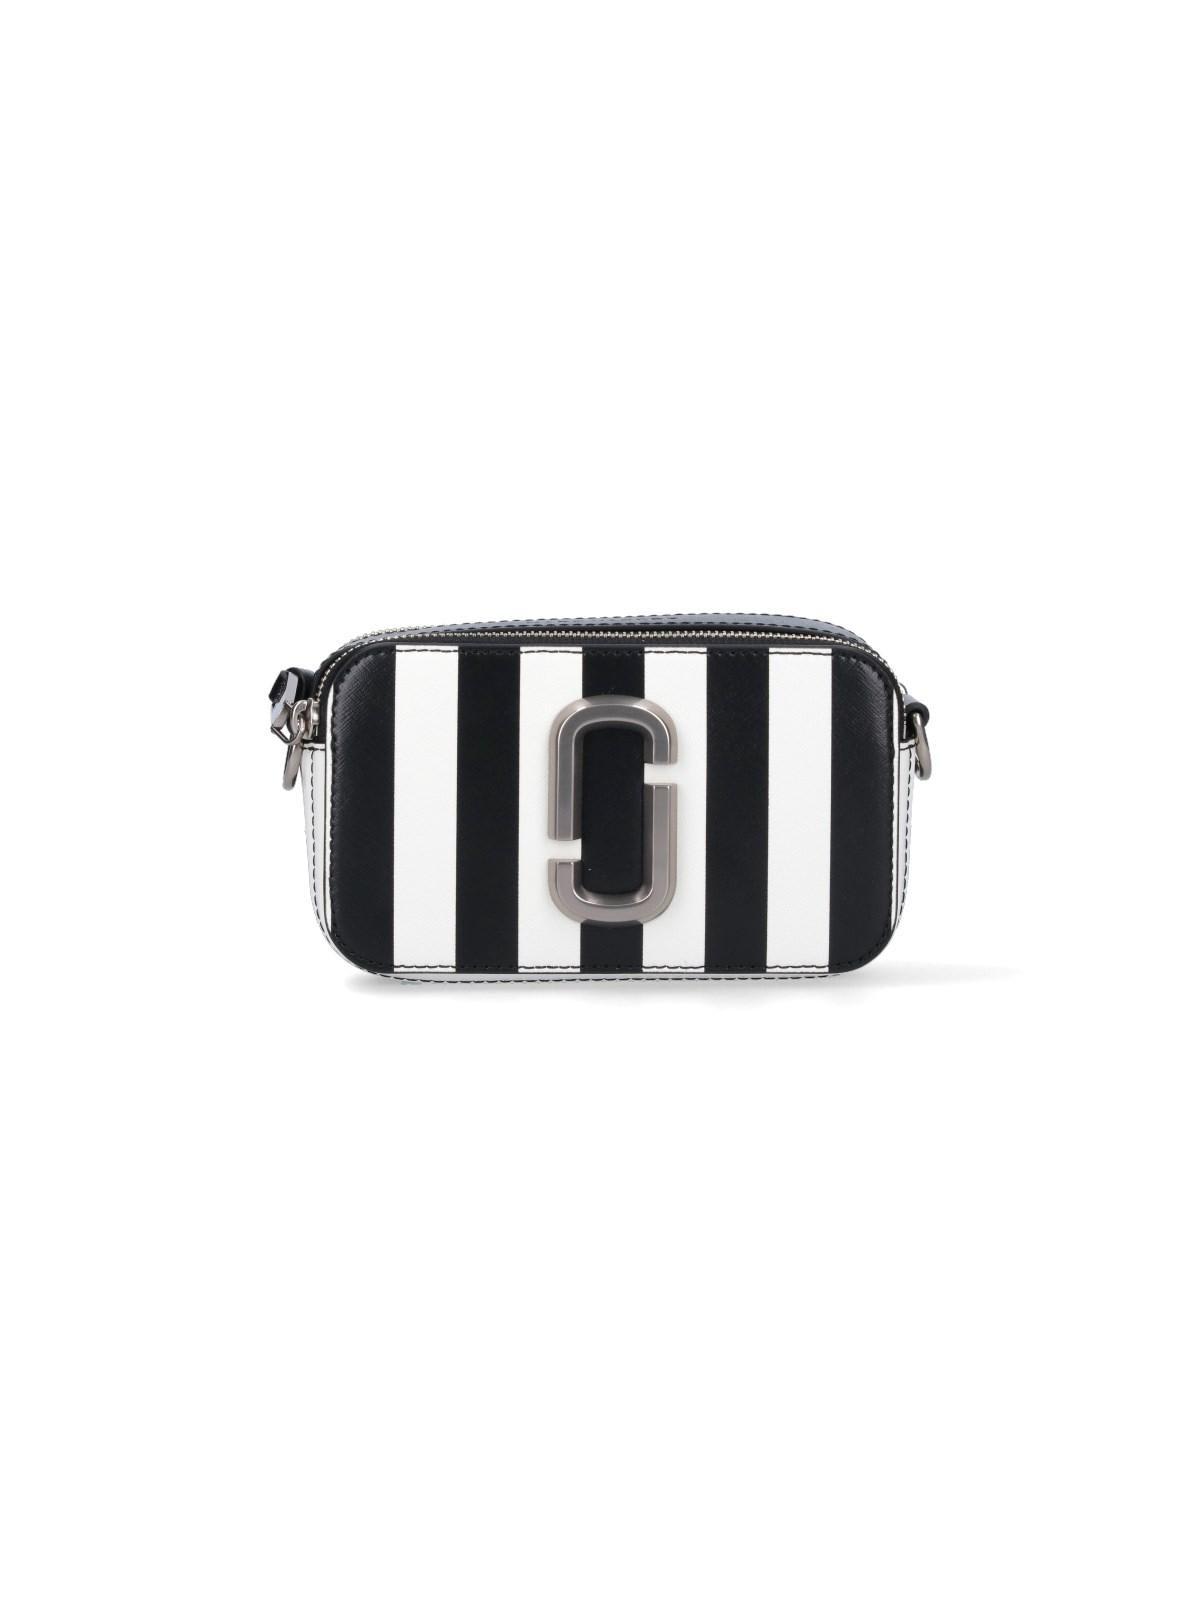 Marc Jacobs The Striped Snapshot Cross-body Bag in Black